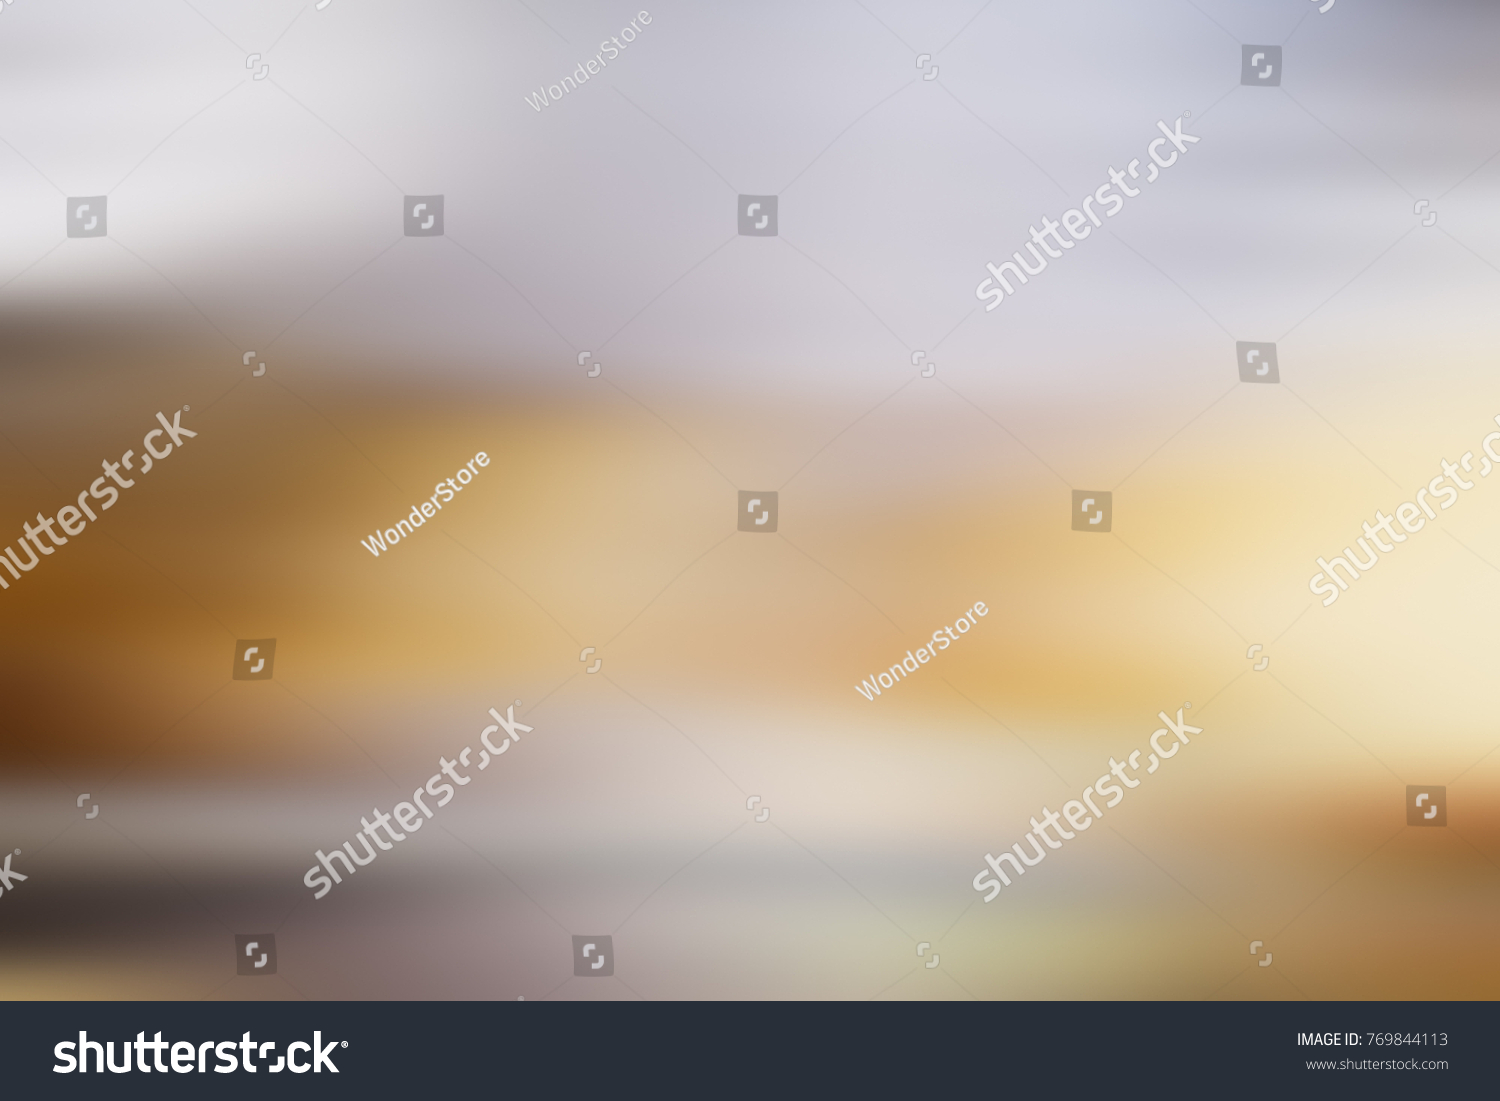 Light abstract gradient motion blurred background. Colorful lines texture wallpaper #769844113